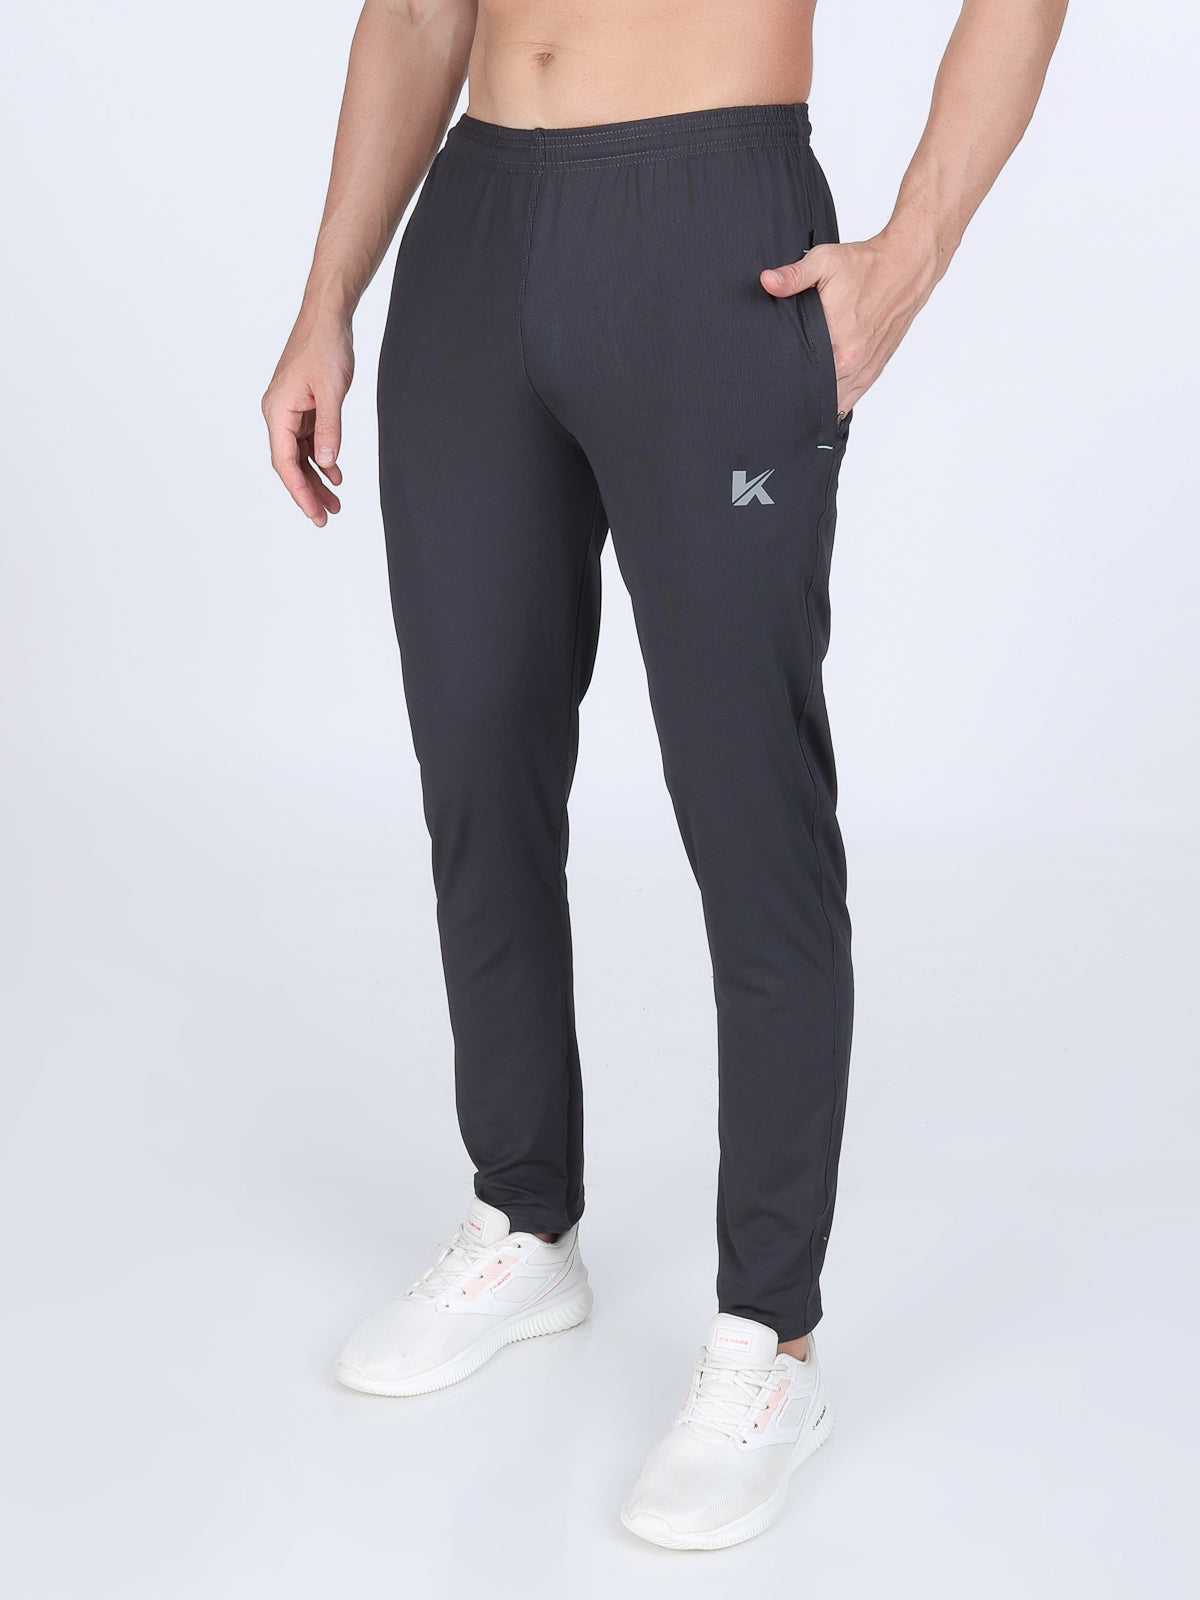 Combo of 2 Men's 4 Way Stretch Lining Pista and Coffee Track Pant